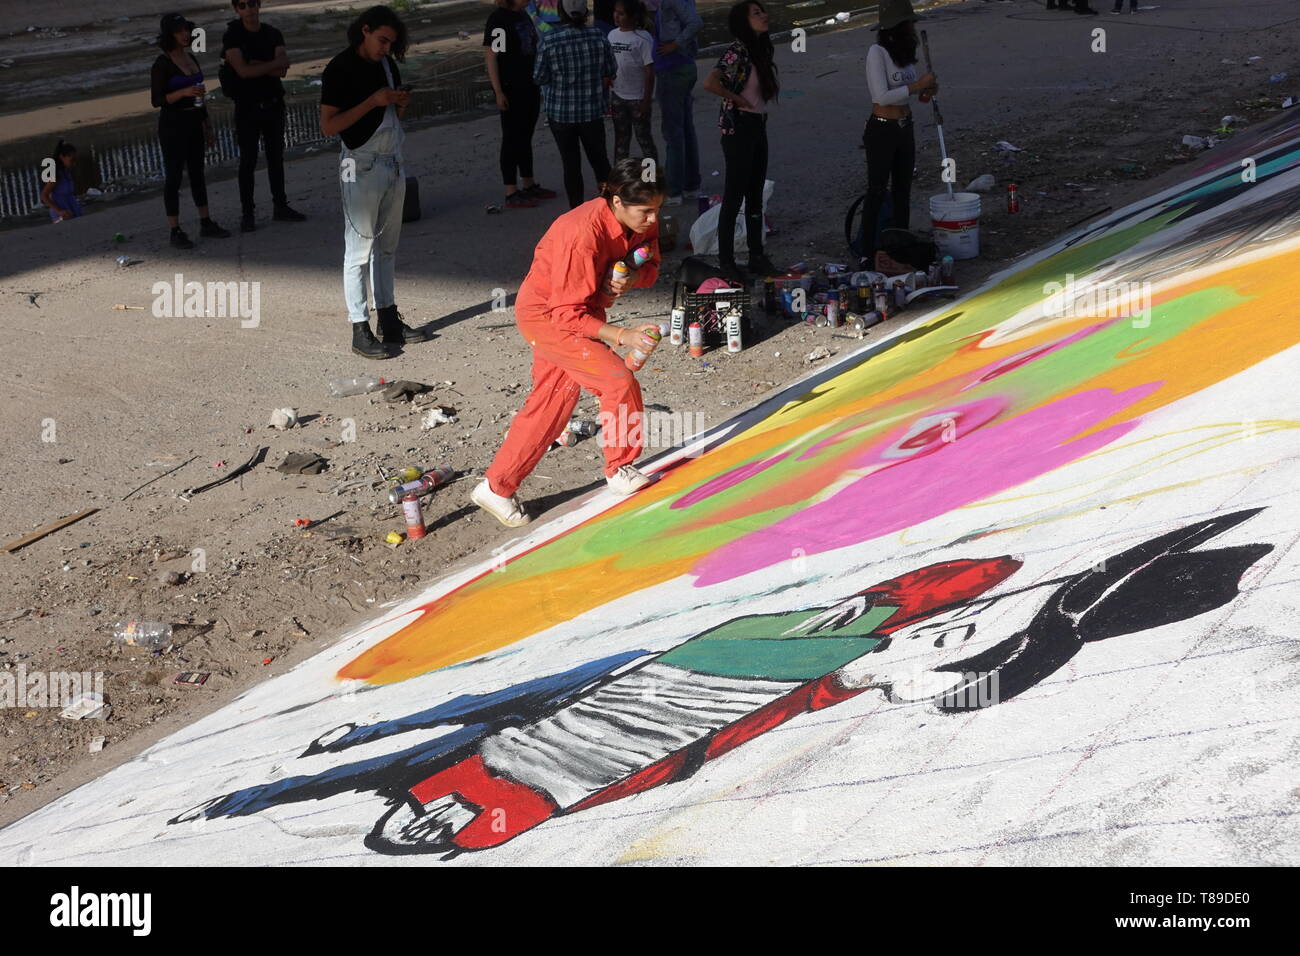 Ciudad Juarez, Mexico. 14th Jan, 2016. The Mexican artist Lupita Pinta is working on an image of a child in the canal of the Rio Bravo border river. A cross-border graffiti meeting with artists from both countries took place in the canal. Credit: David Peinado/dpa/Alamy Live News Stock Photo